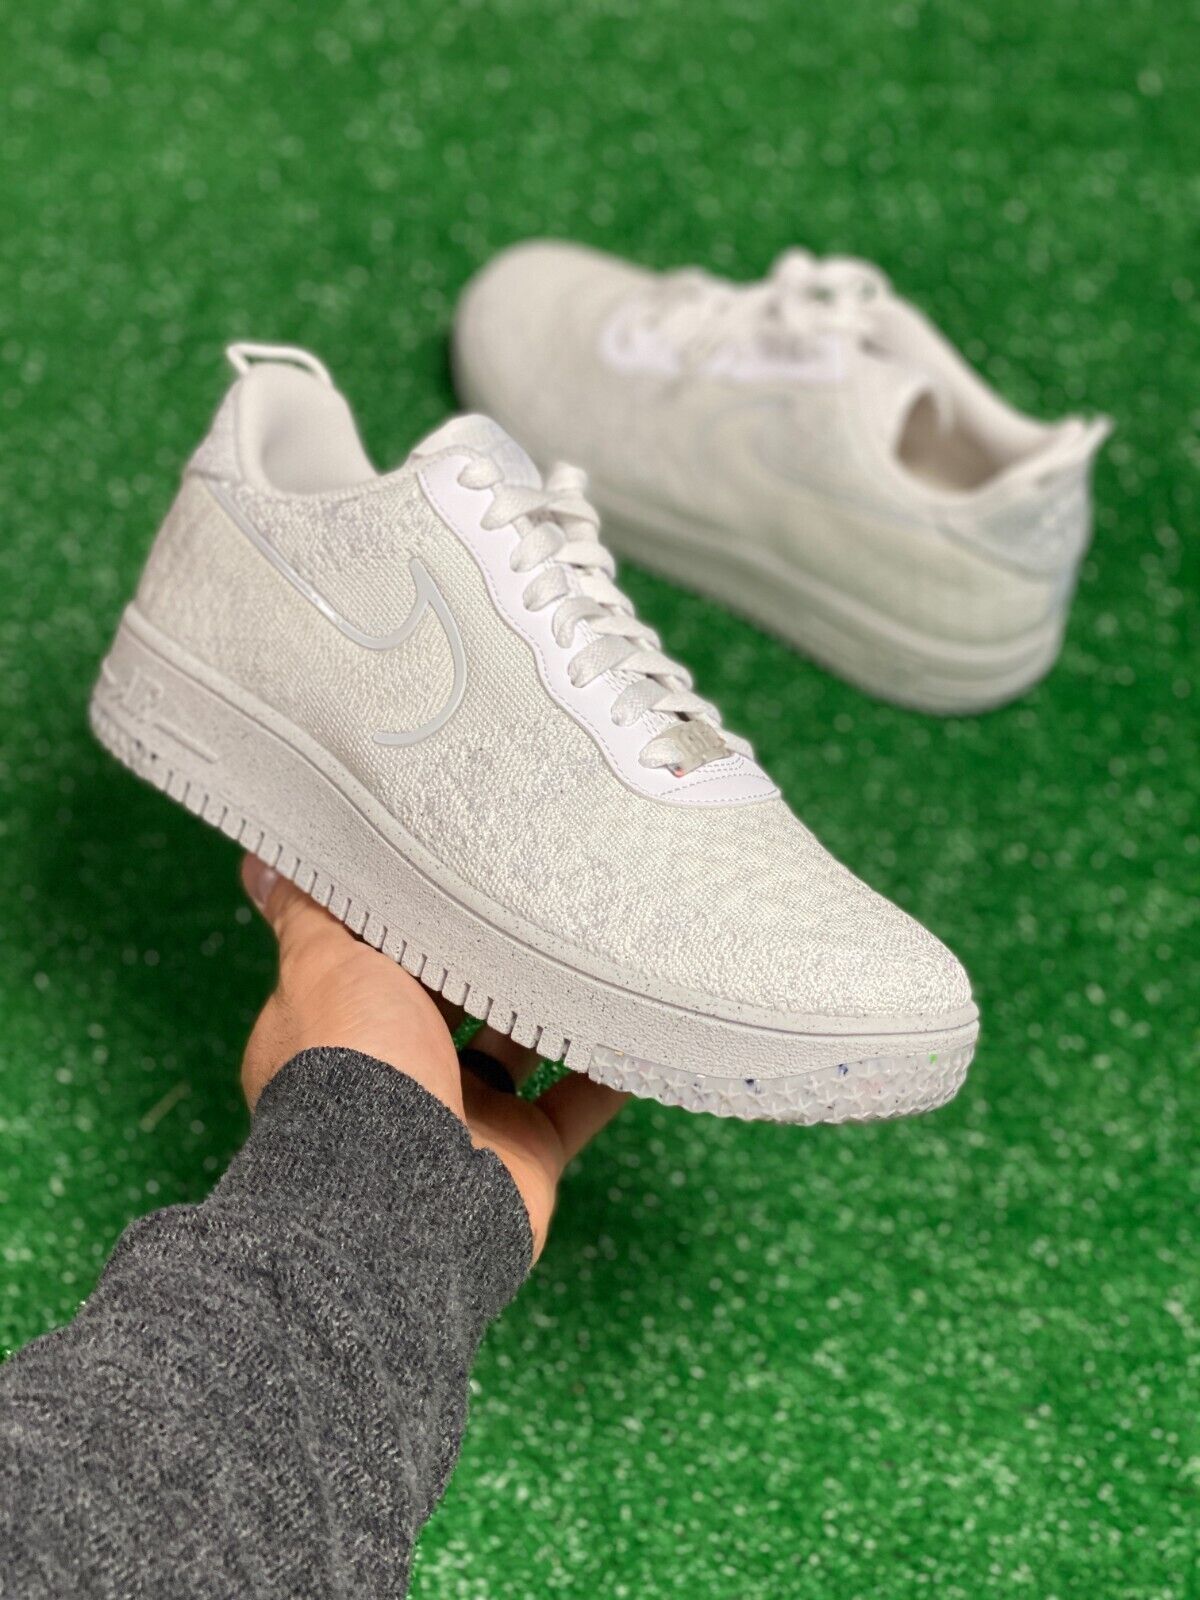 Nike Air Force 1 Crater Flyknit Next NN Mens Shoes White DM0590-100 NEW Multi Sz